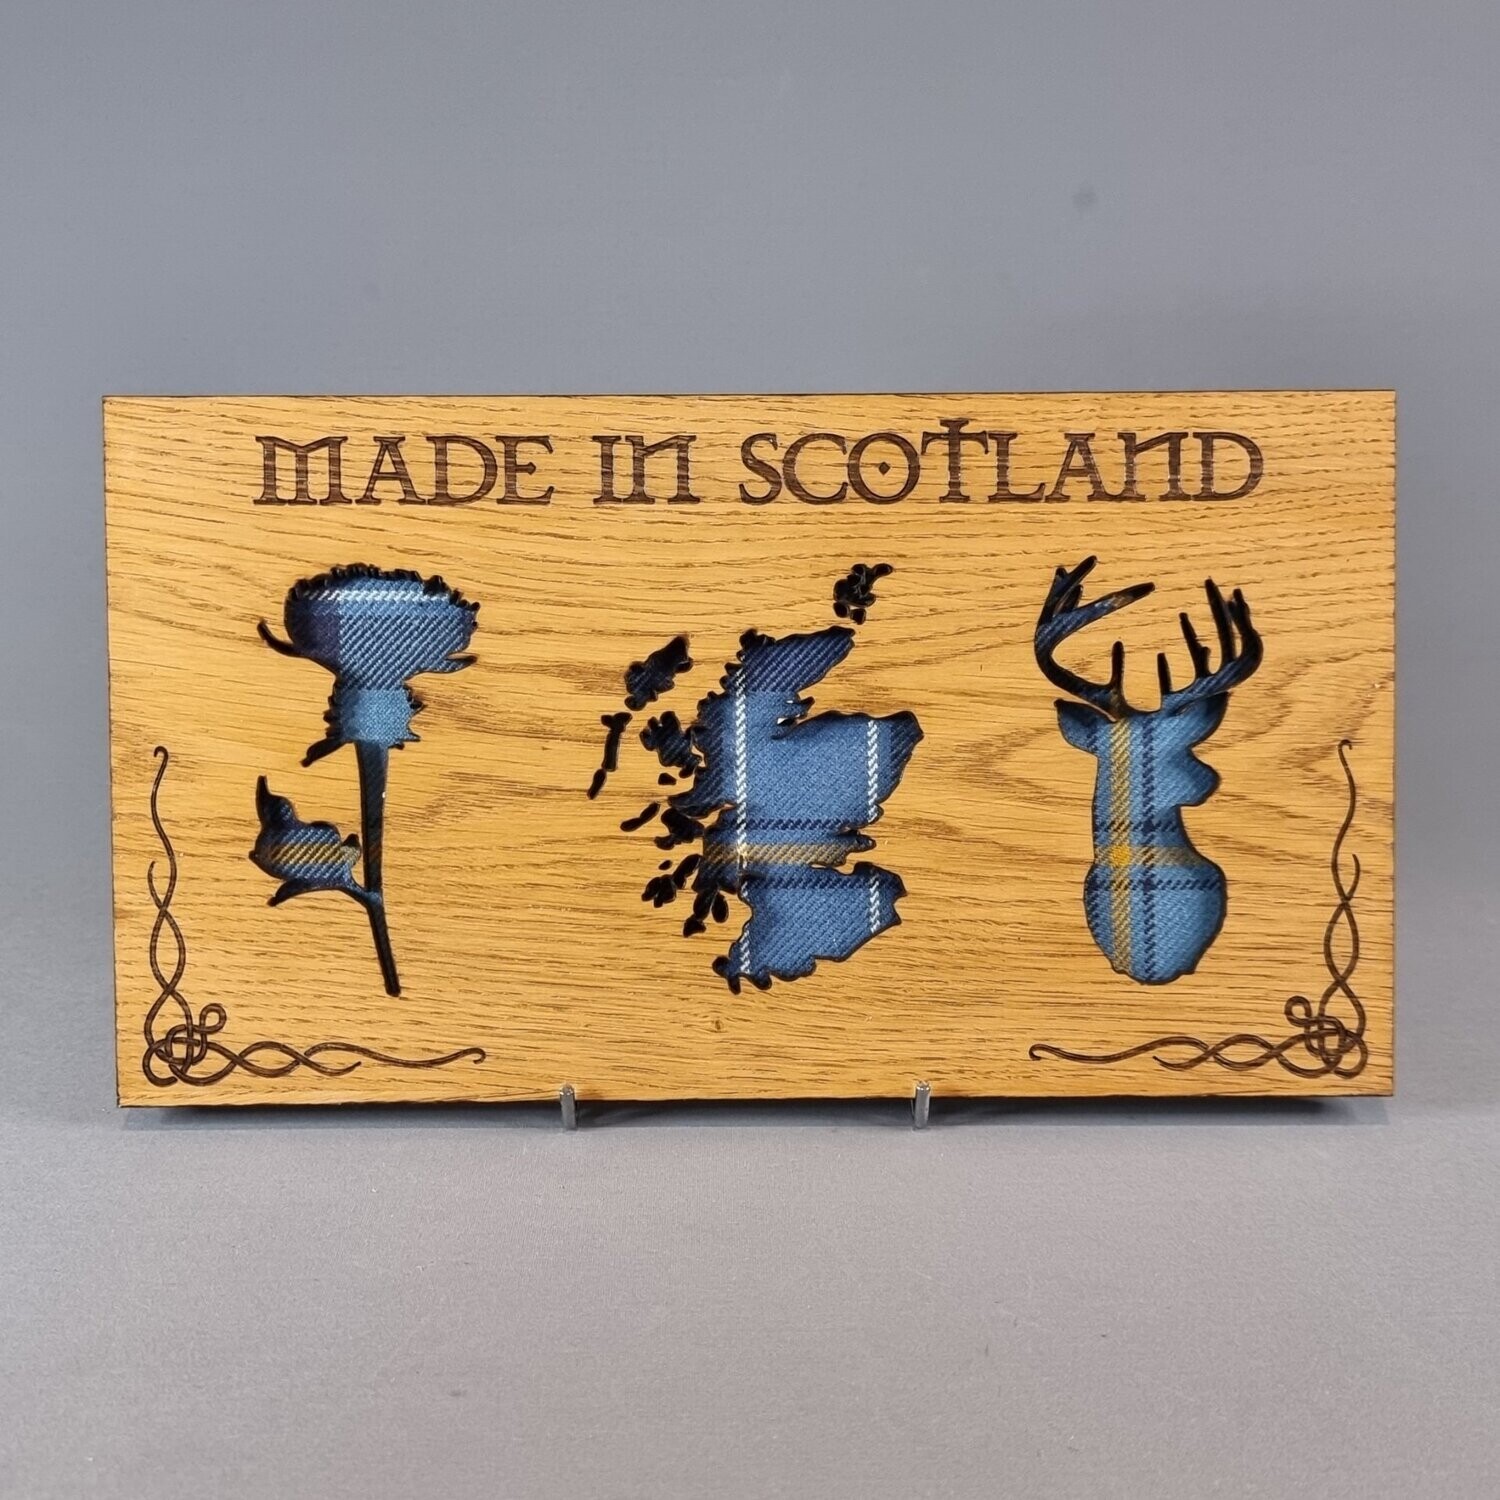 Scottish Landscape Style Oak Frame With Tartan & Thistle, Scotland & Stag - "MADE IN SCOTLAND" Quote